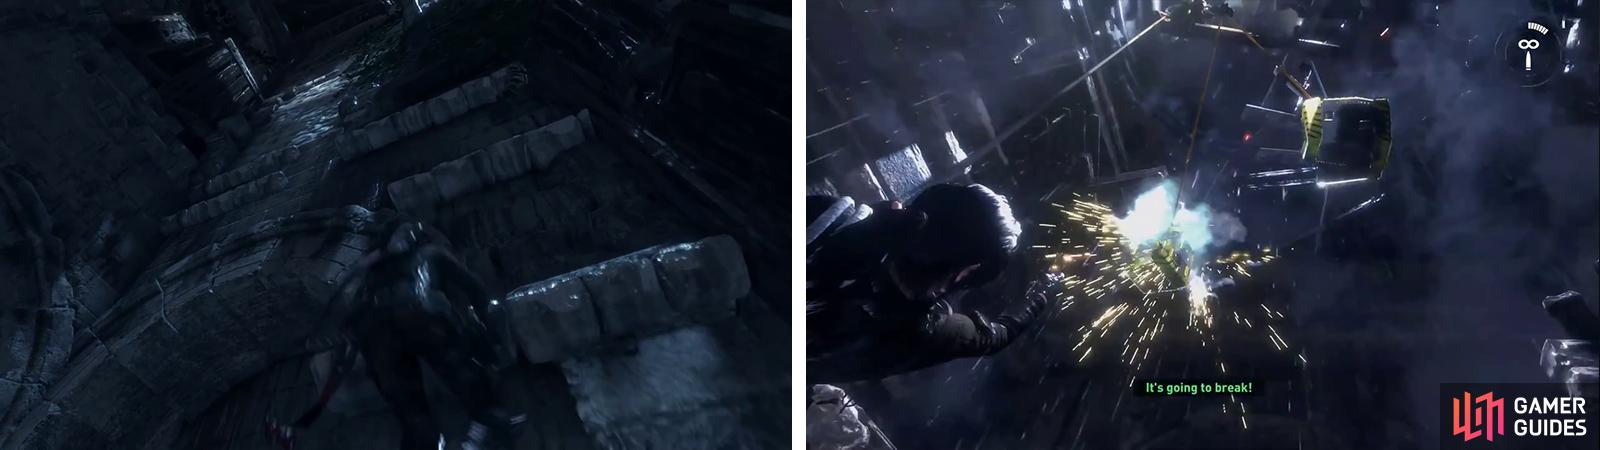 Climb to the top of the cathedral’s interior (left). During the cut-scene, shoot the generators (right) to continue.